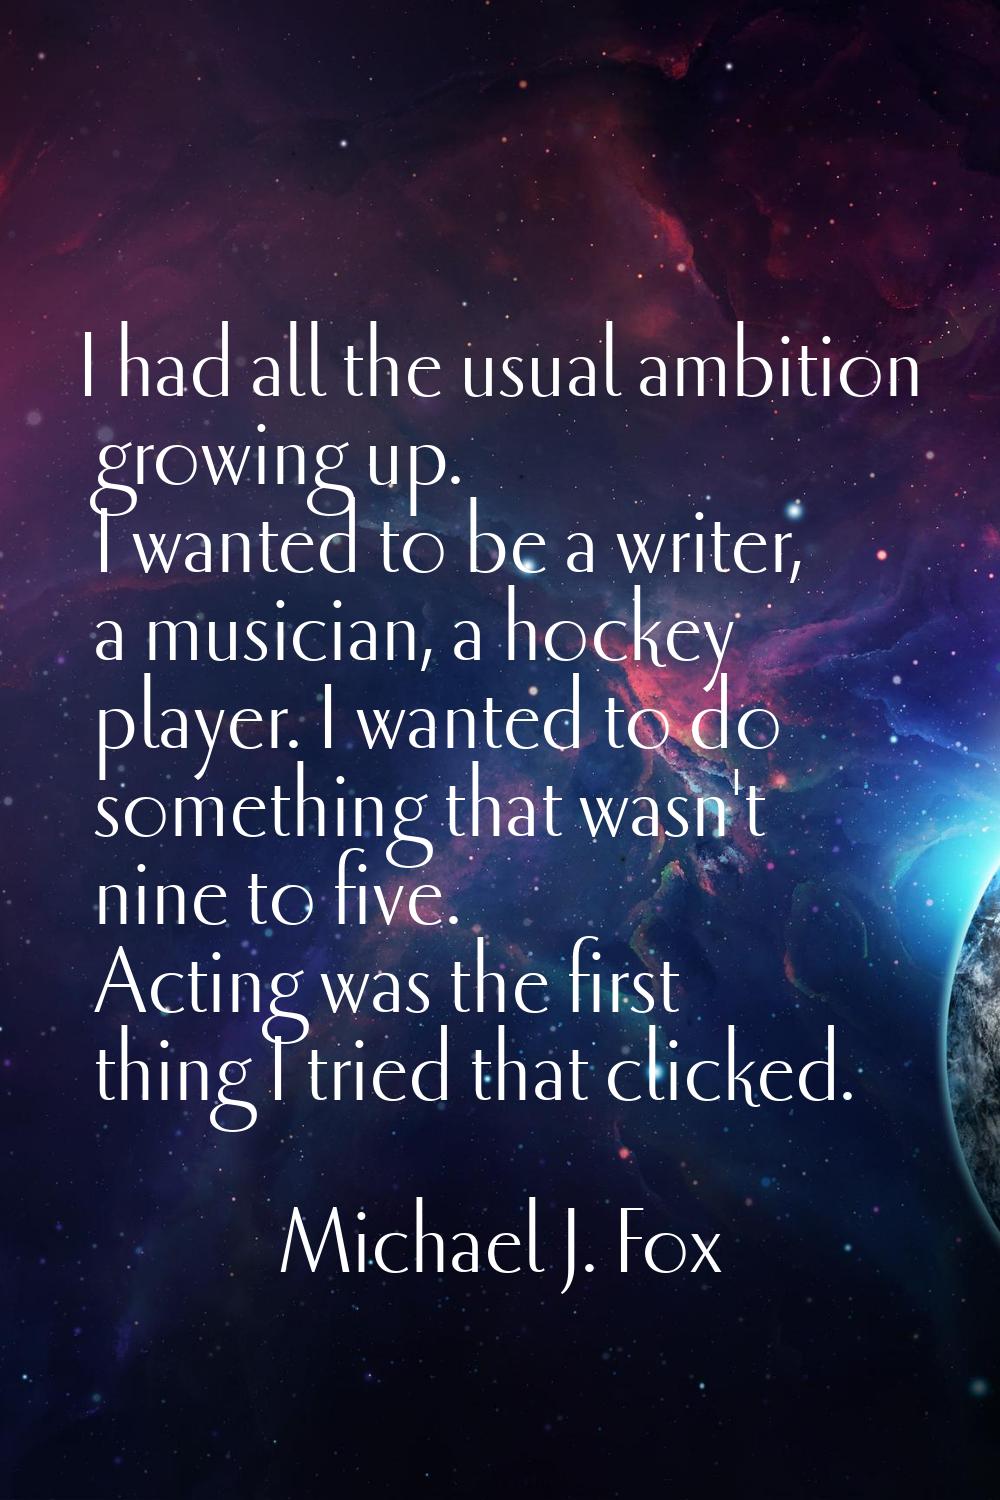 I had all the usual ambition growing up. I wanted to be a writer, a musician, a hockey player. I wa